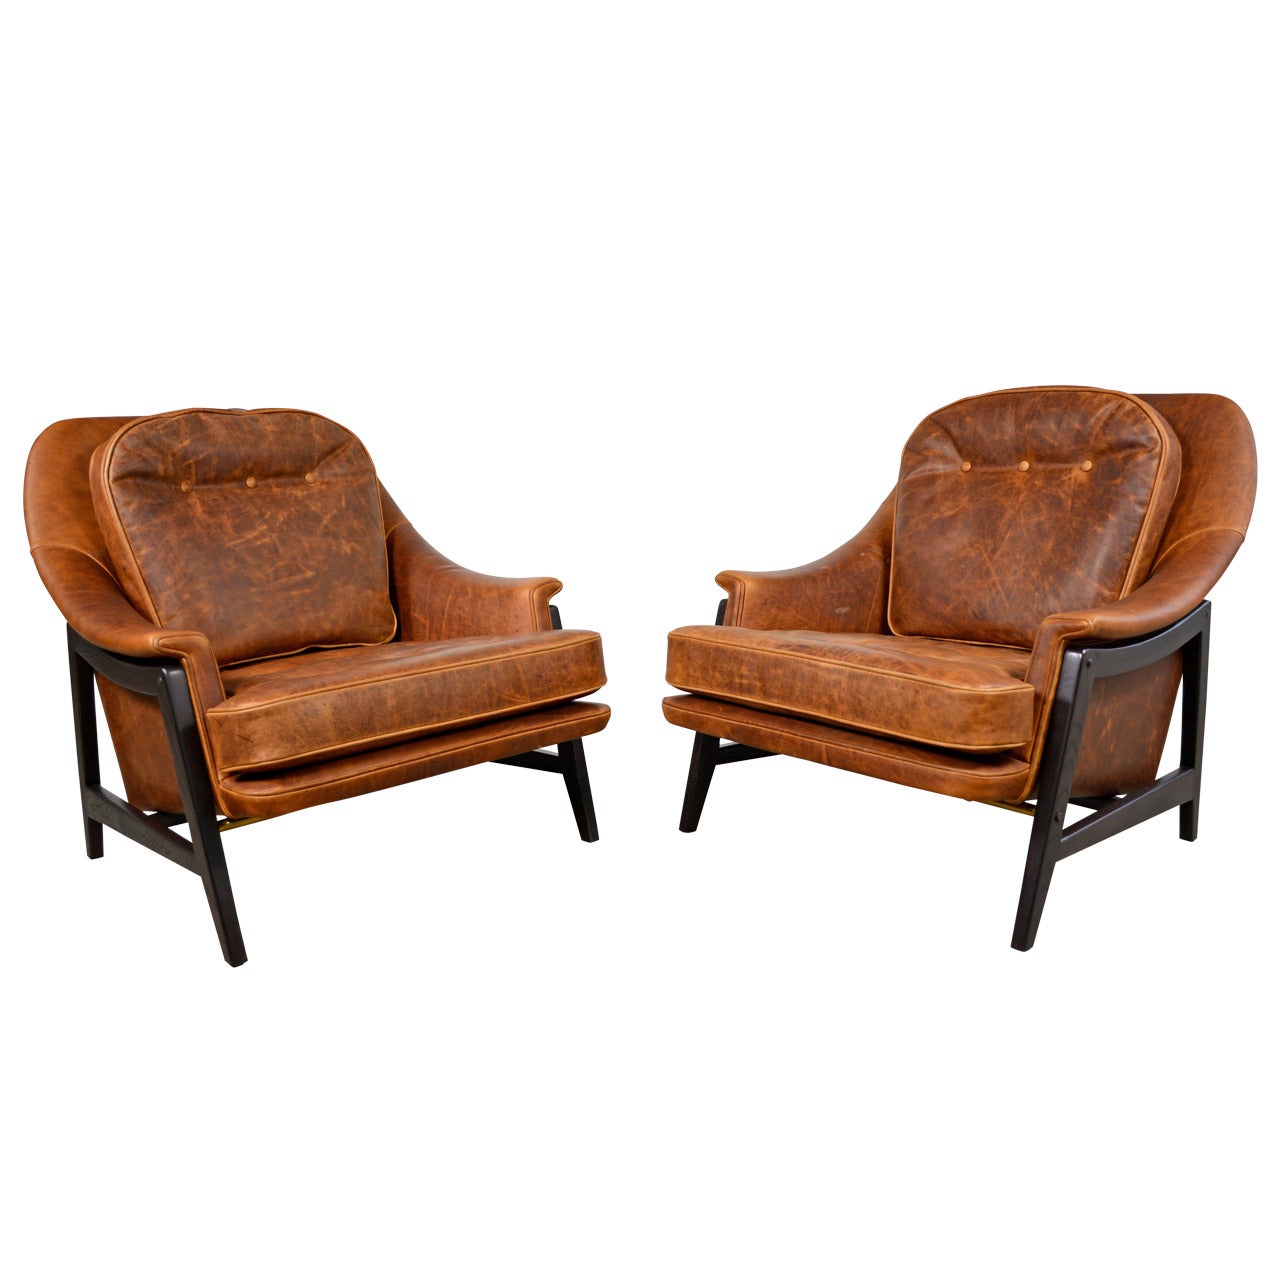 Edward Wormley for Dunbar Pair of Leather Lounge Chairs For Sale